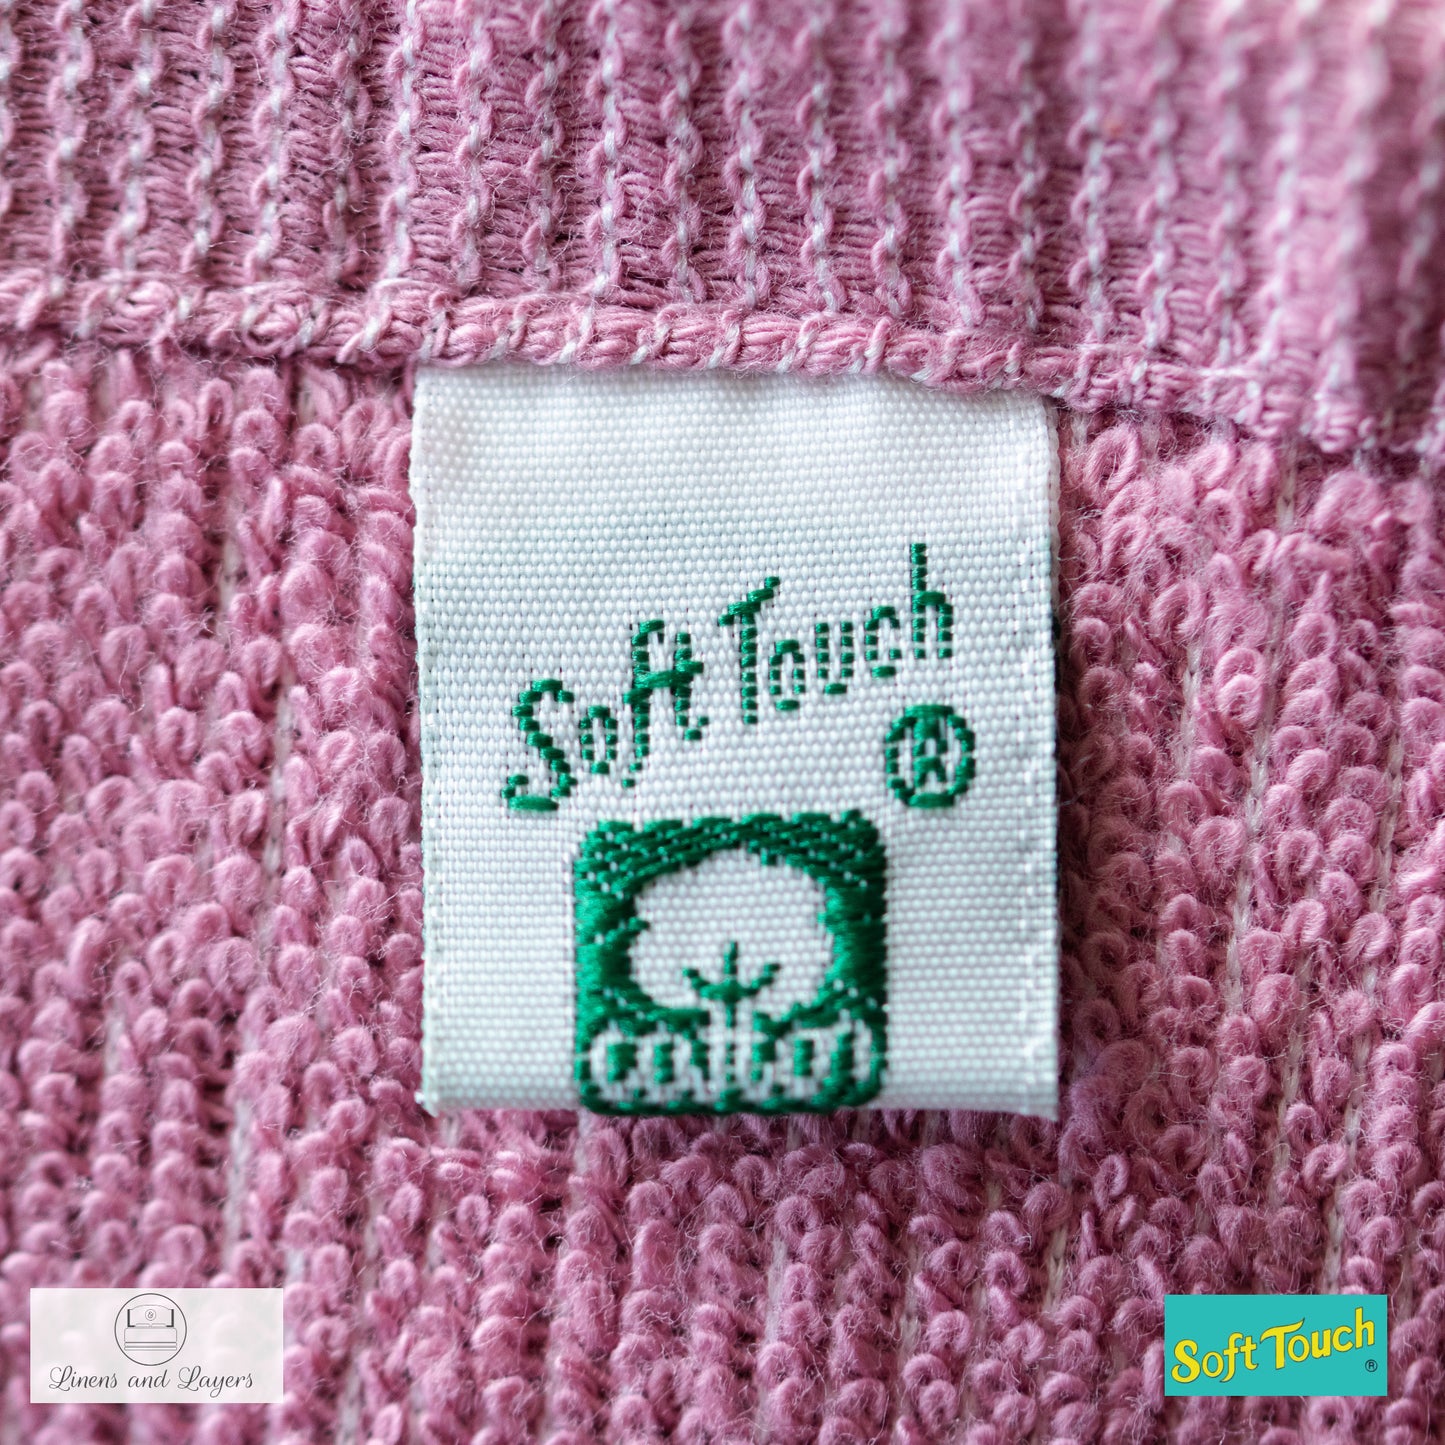 Soft Touch Hand Towel (390 GSM) - H-1330 Terrycloth - 13x30 inches